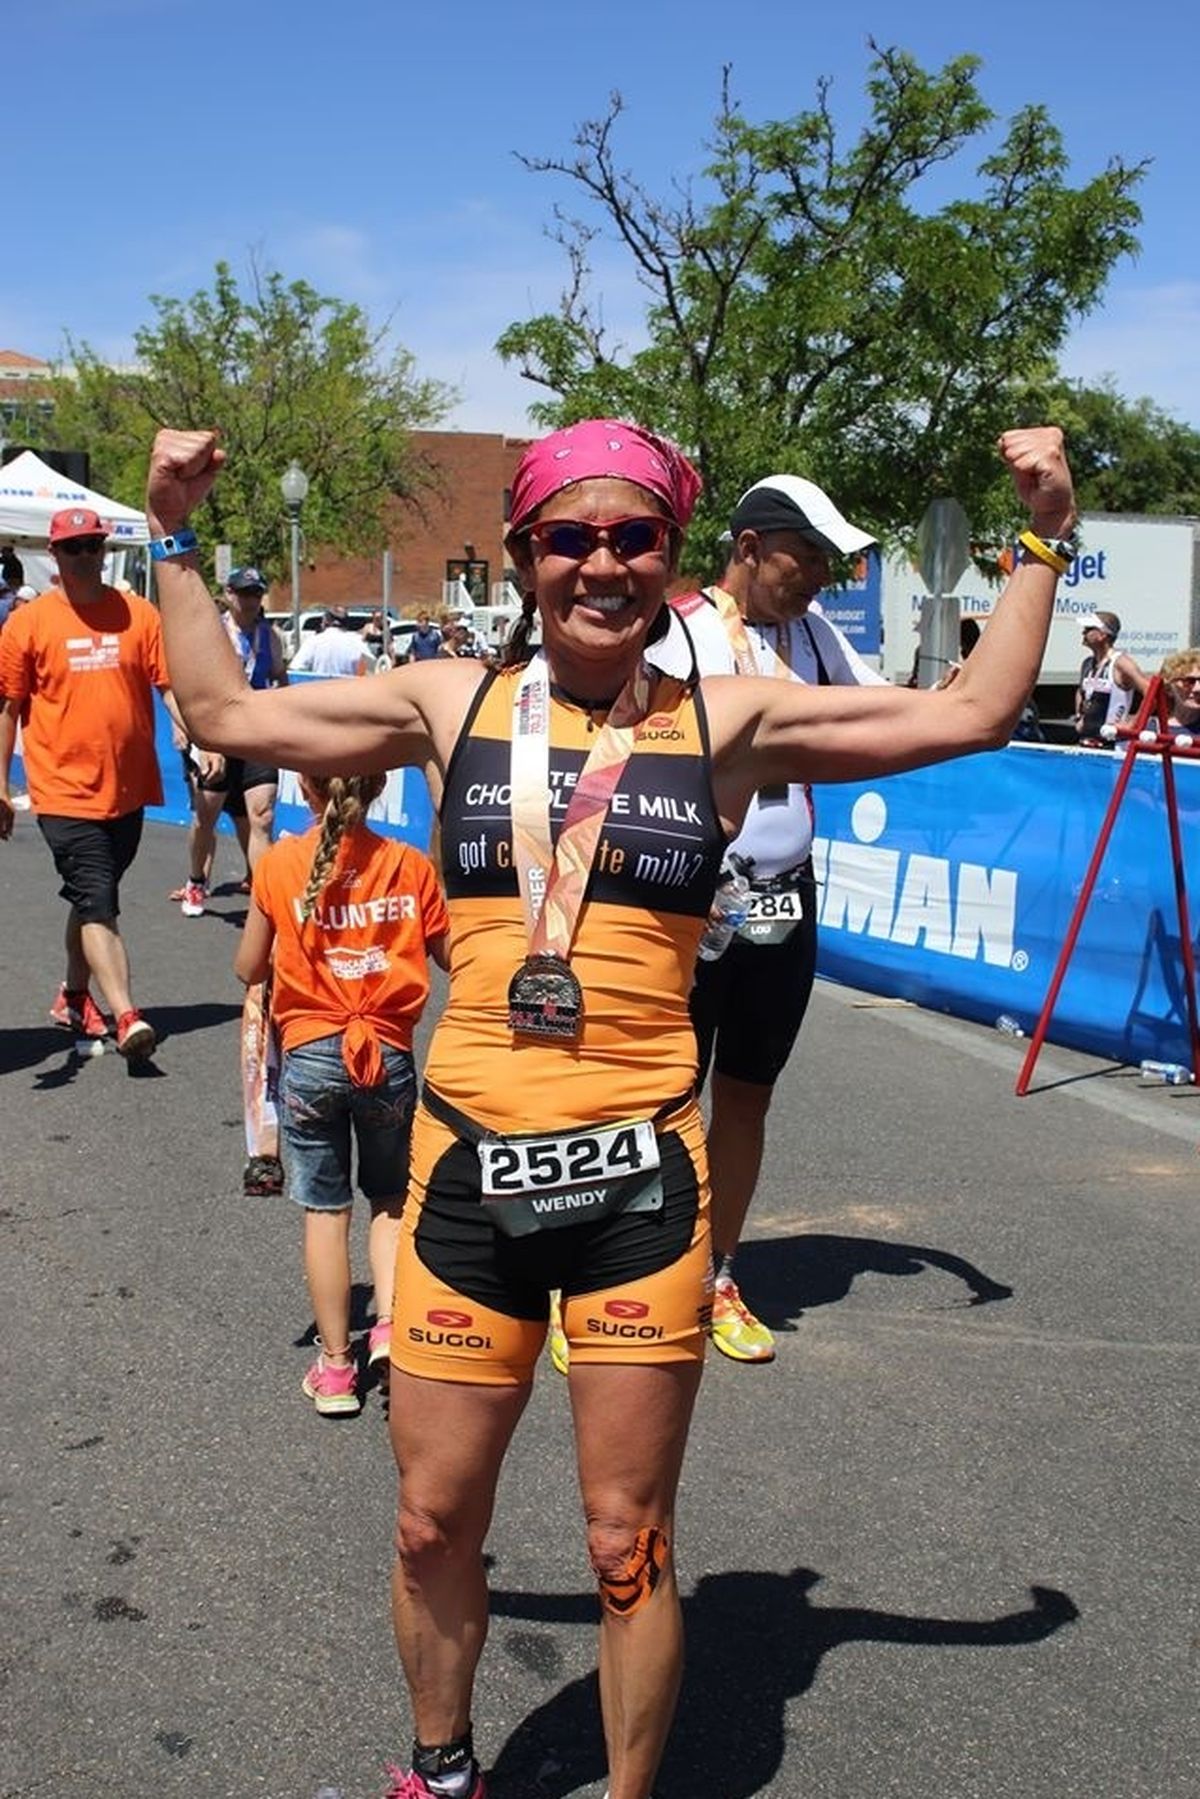 Seven months after radiation treatments, Wendy Chioji will compete in Ironman CdA.